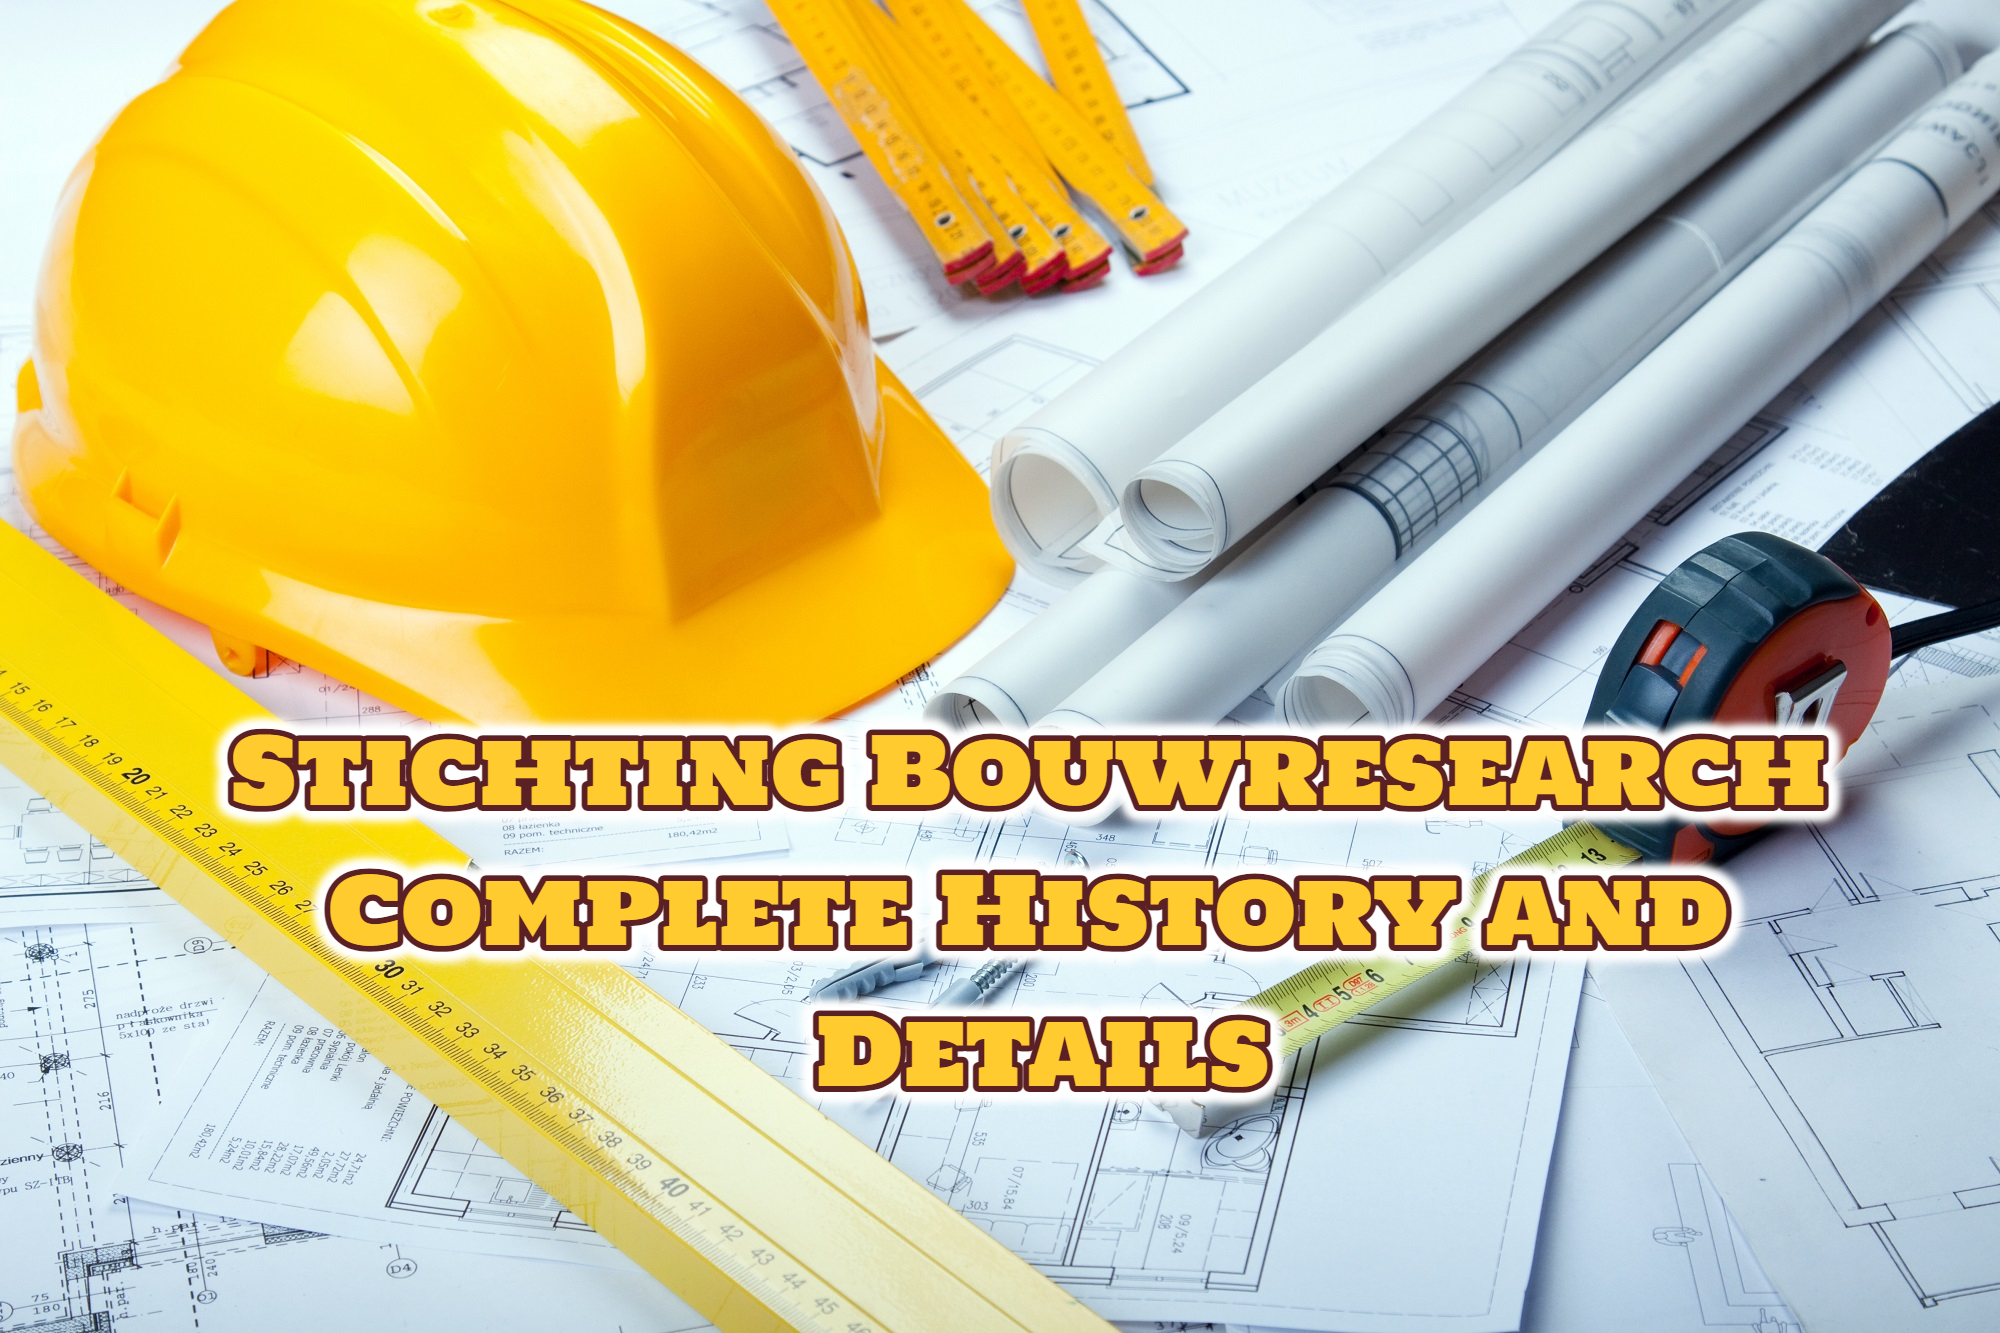 Stichting Bouwresearch: Complete History and Details